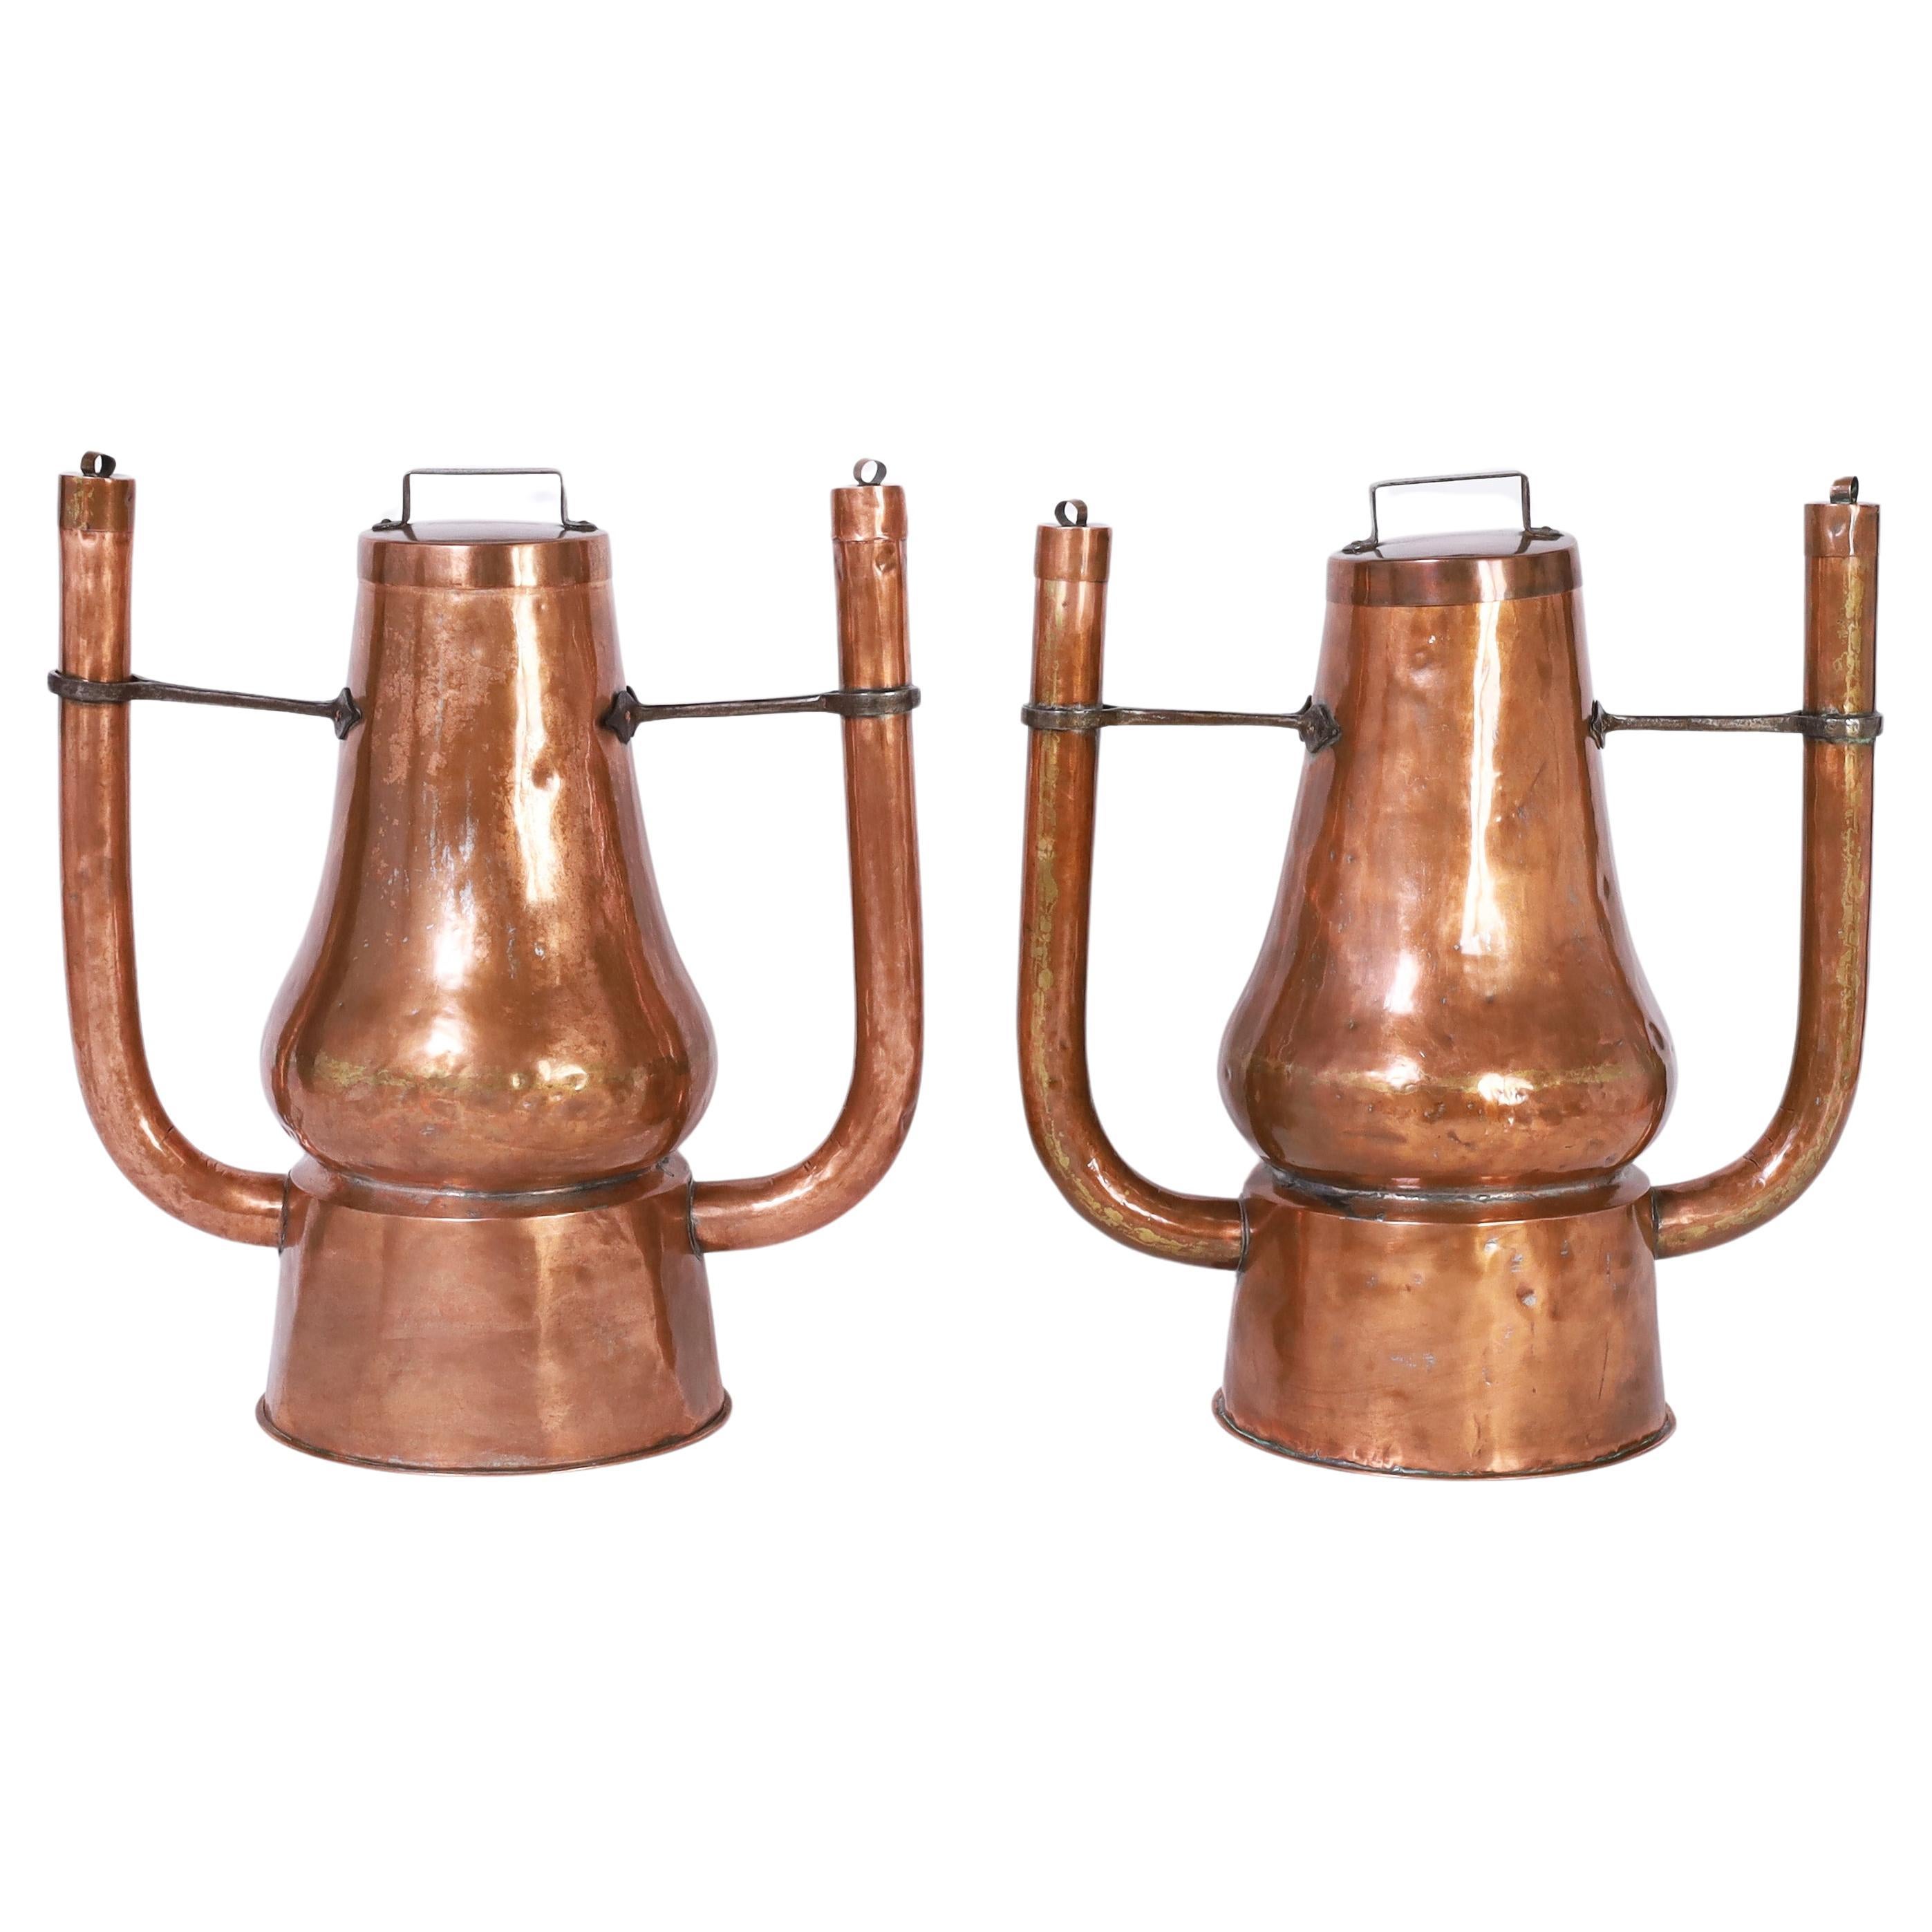 Pair of Antique French Copper Bath Warmers For Sale